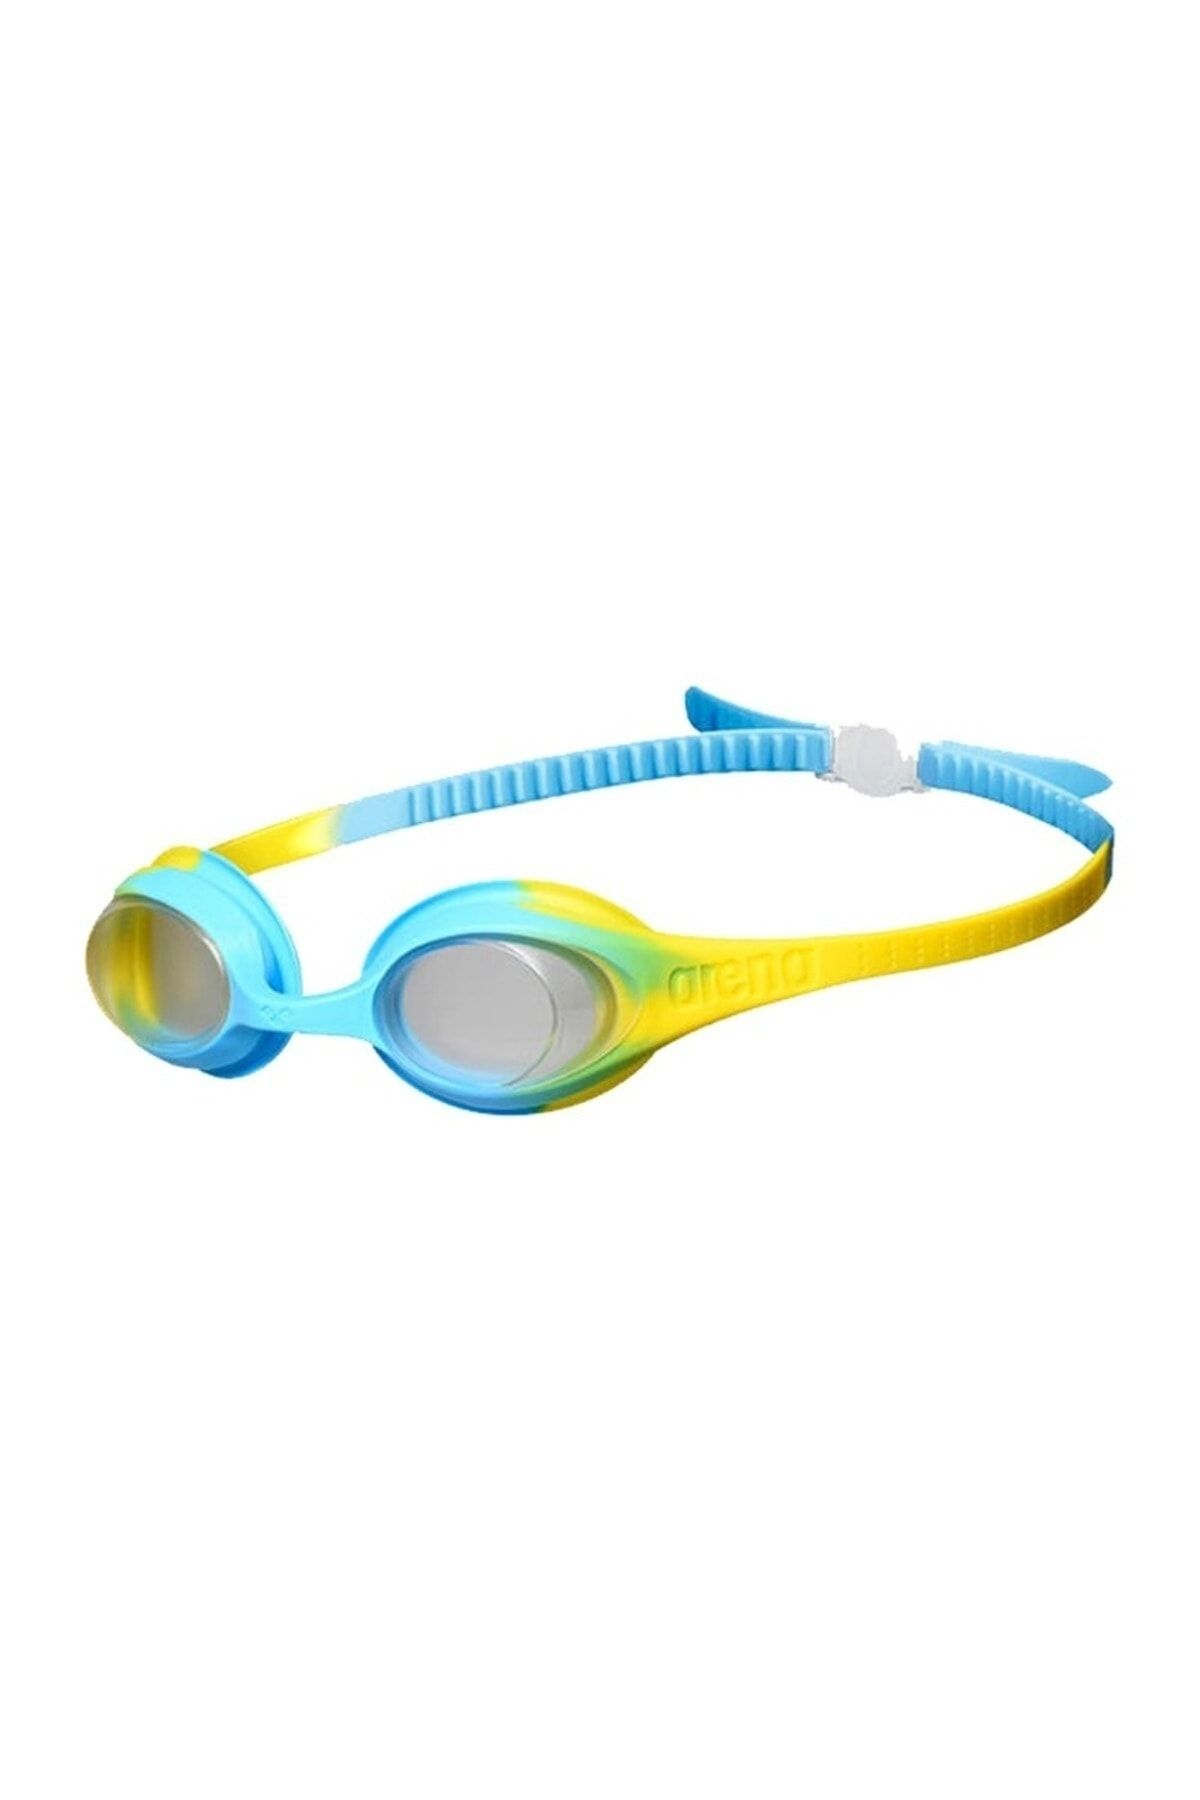 Arena SPIDER KIDS CLEAR YELLOW LIGHT BLUE